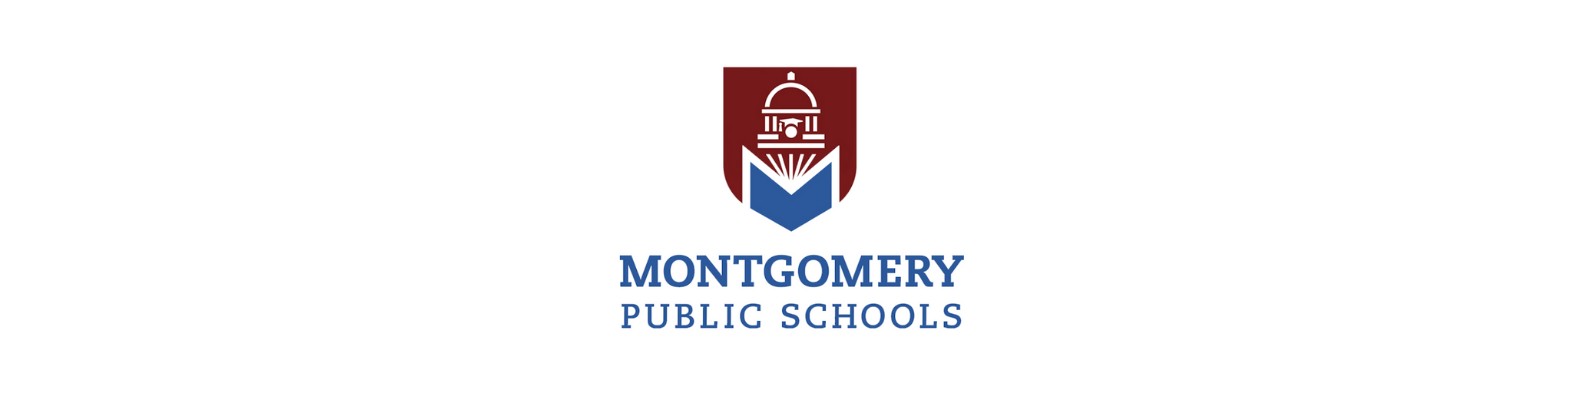 Featured Image for How Progress Learning Supports Montgomery, Alabama Public Schools